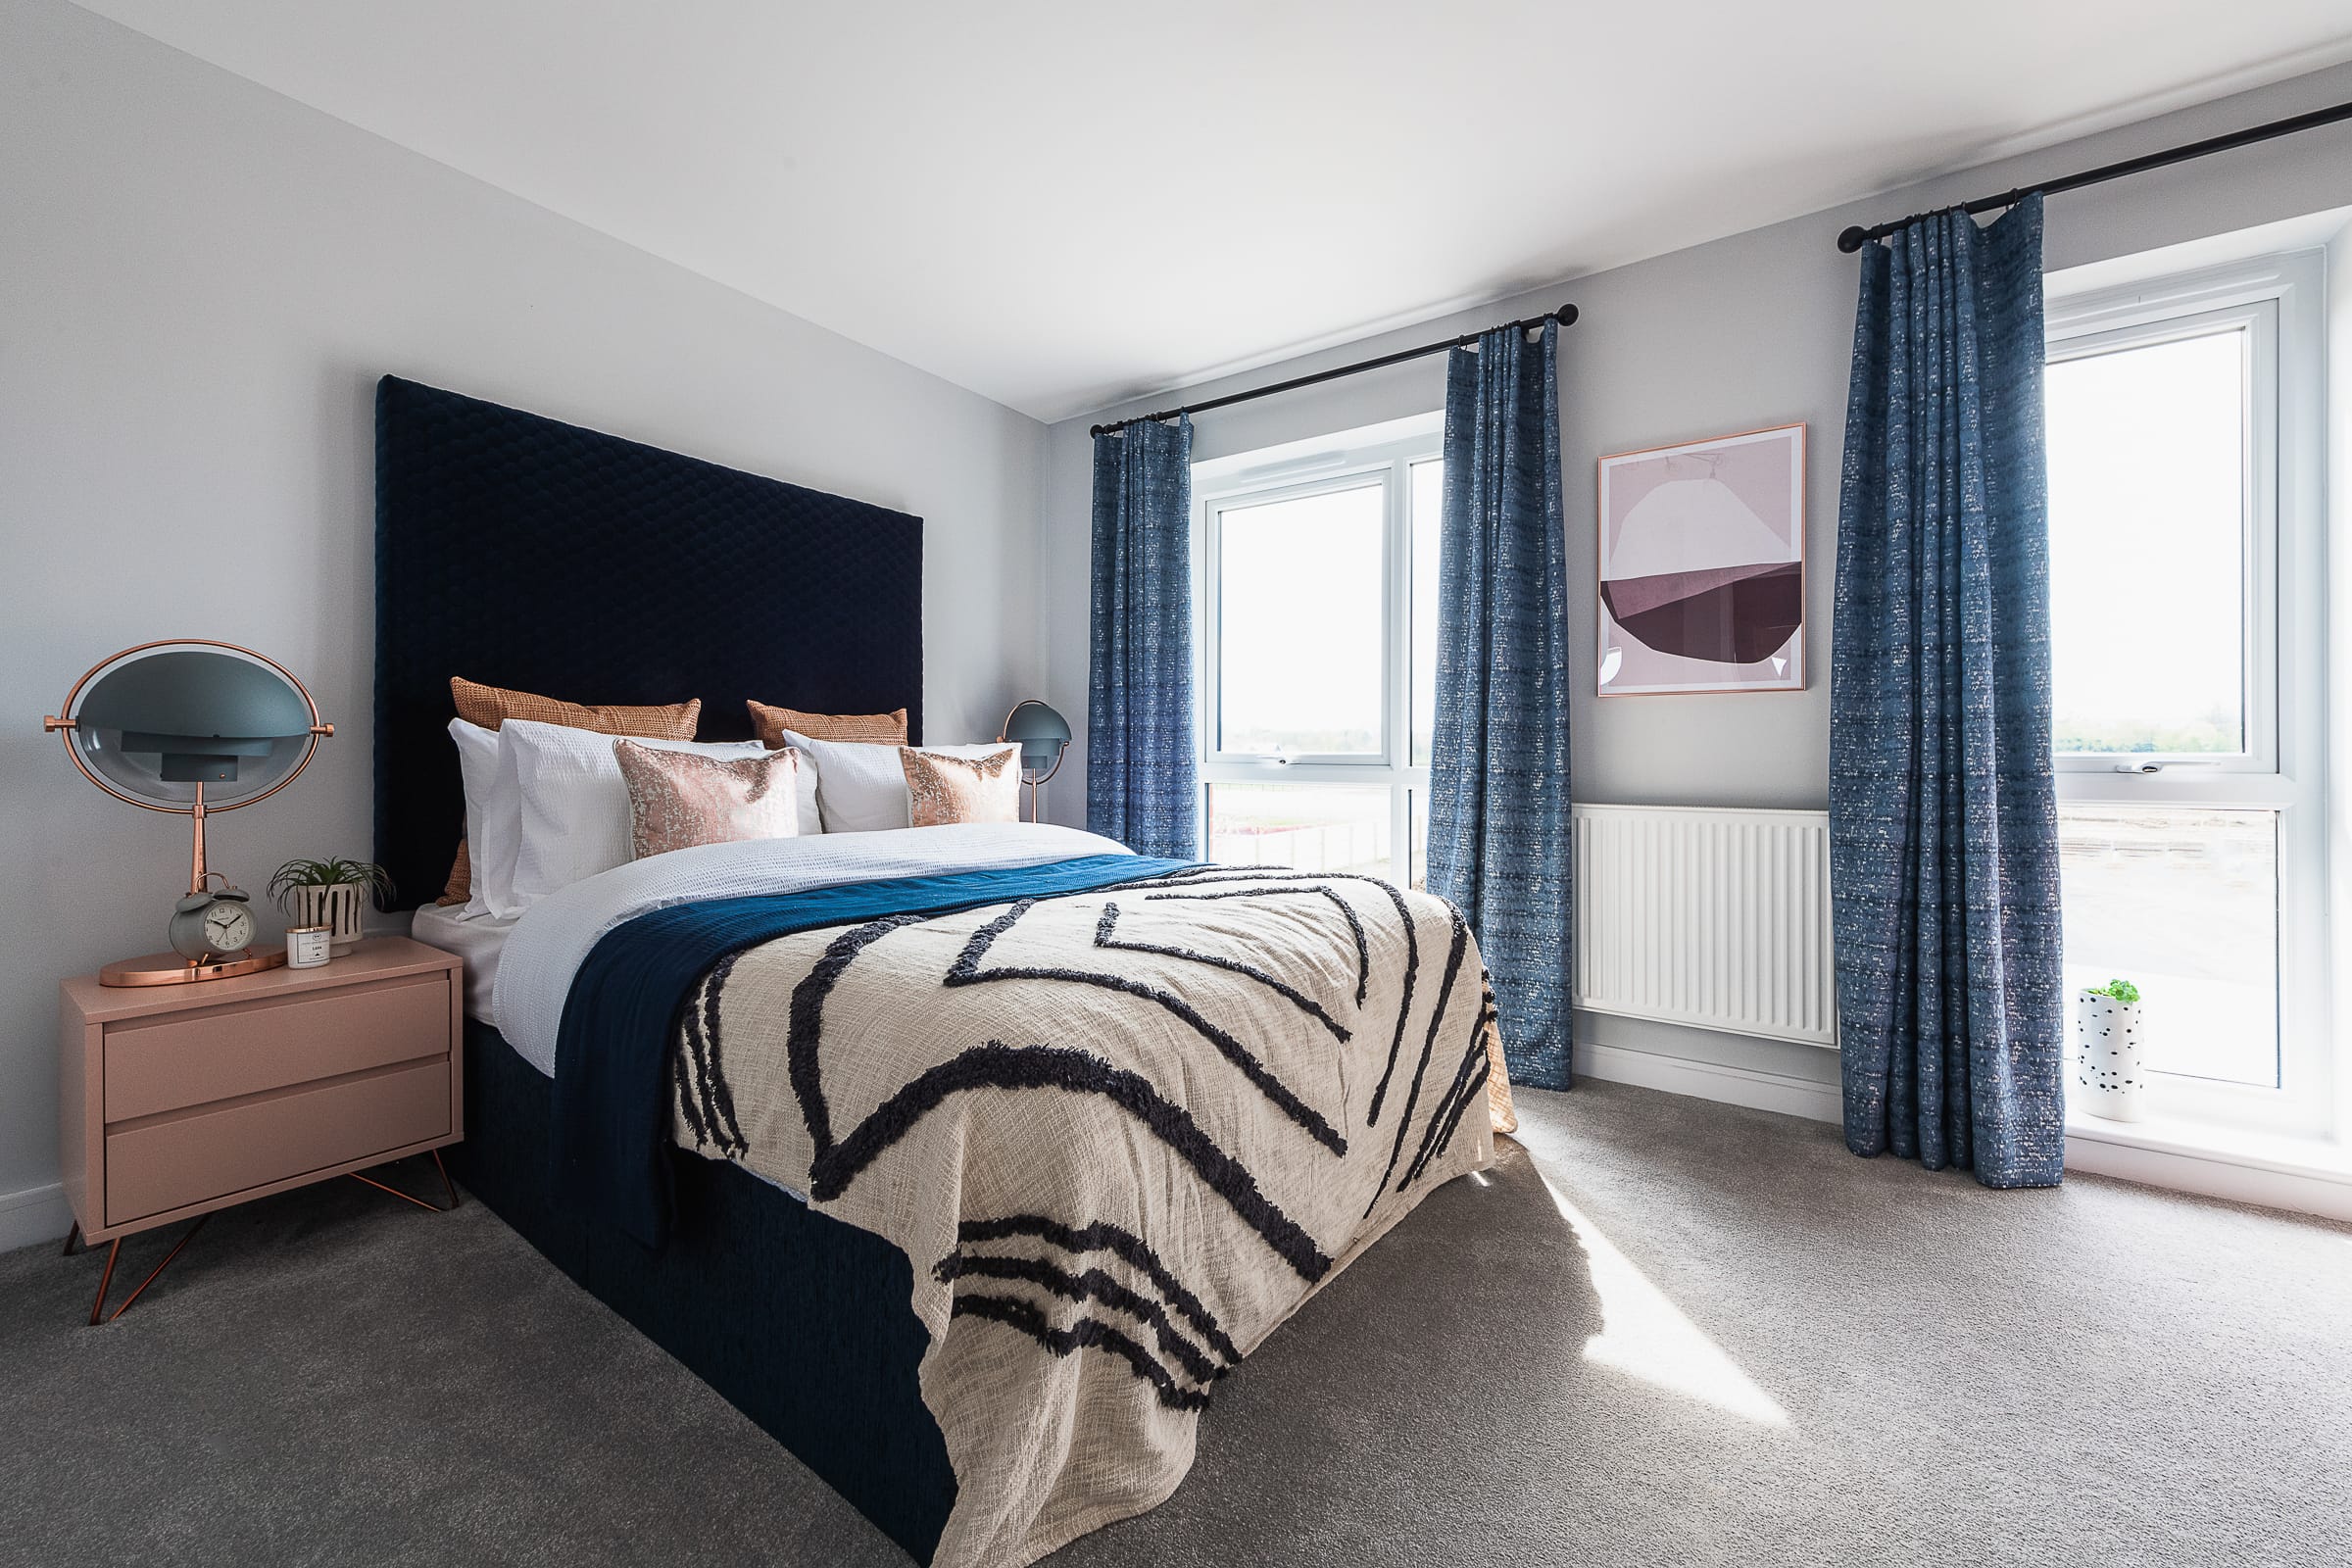 Interior show home photography of L&Q's part exchange properties at Saxon Reach - Shared Ownership homes available on Share to Buy!